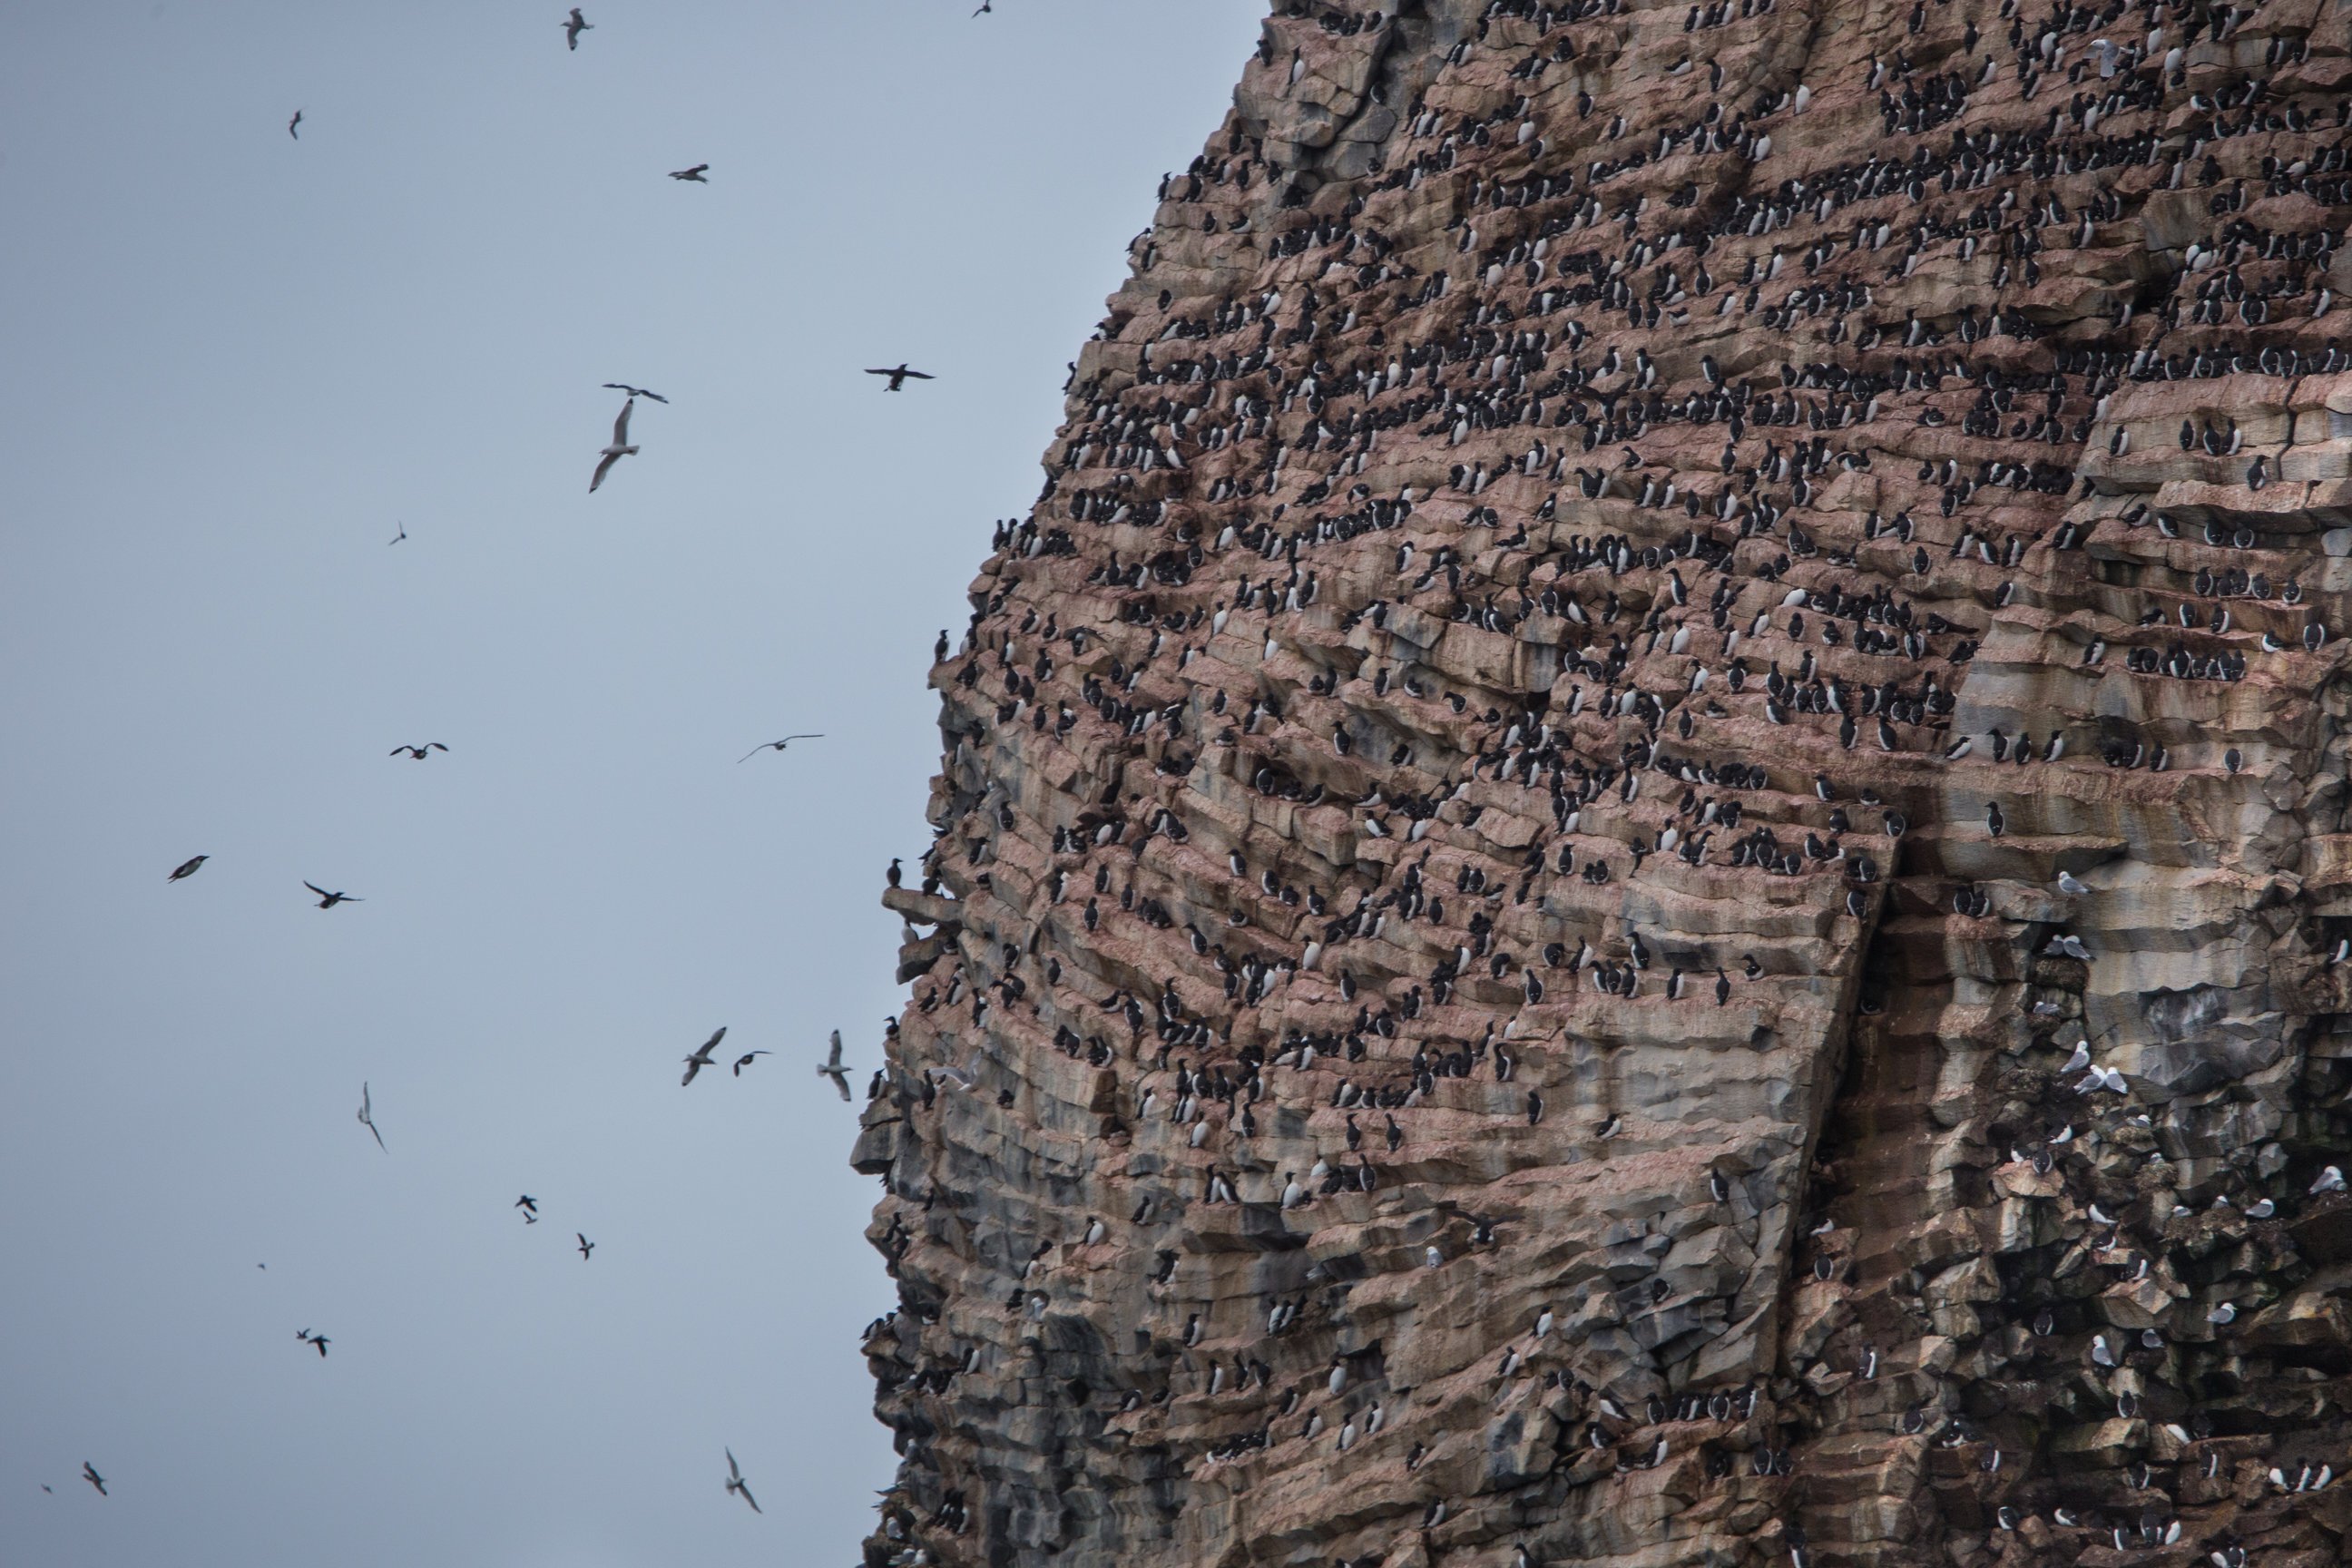 Seabirds swoop and dive against a murky Arctic sky at a bird cliff in Franz Josef Land. Photo credit: Николай Гернет